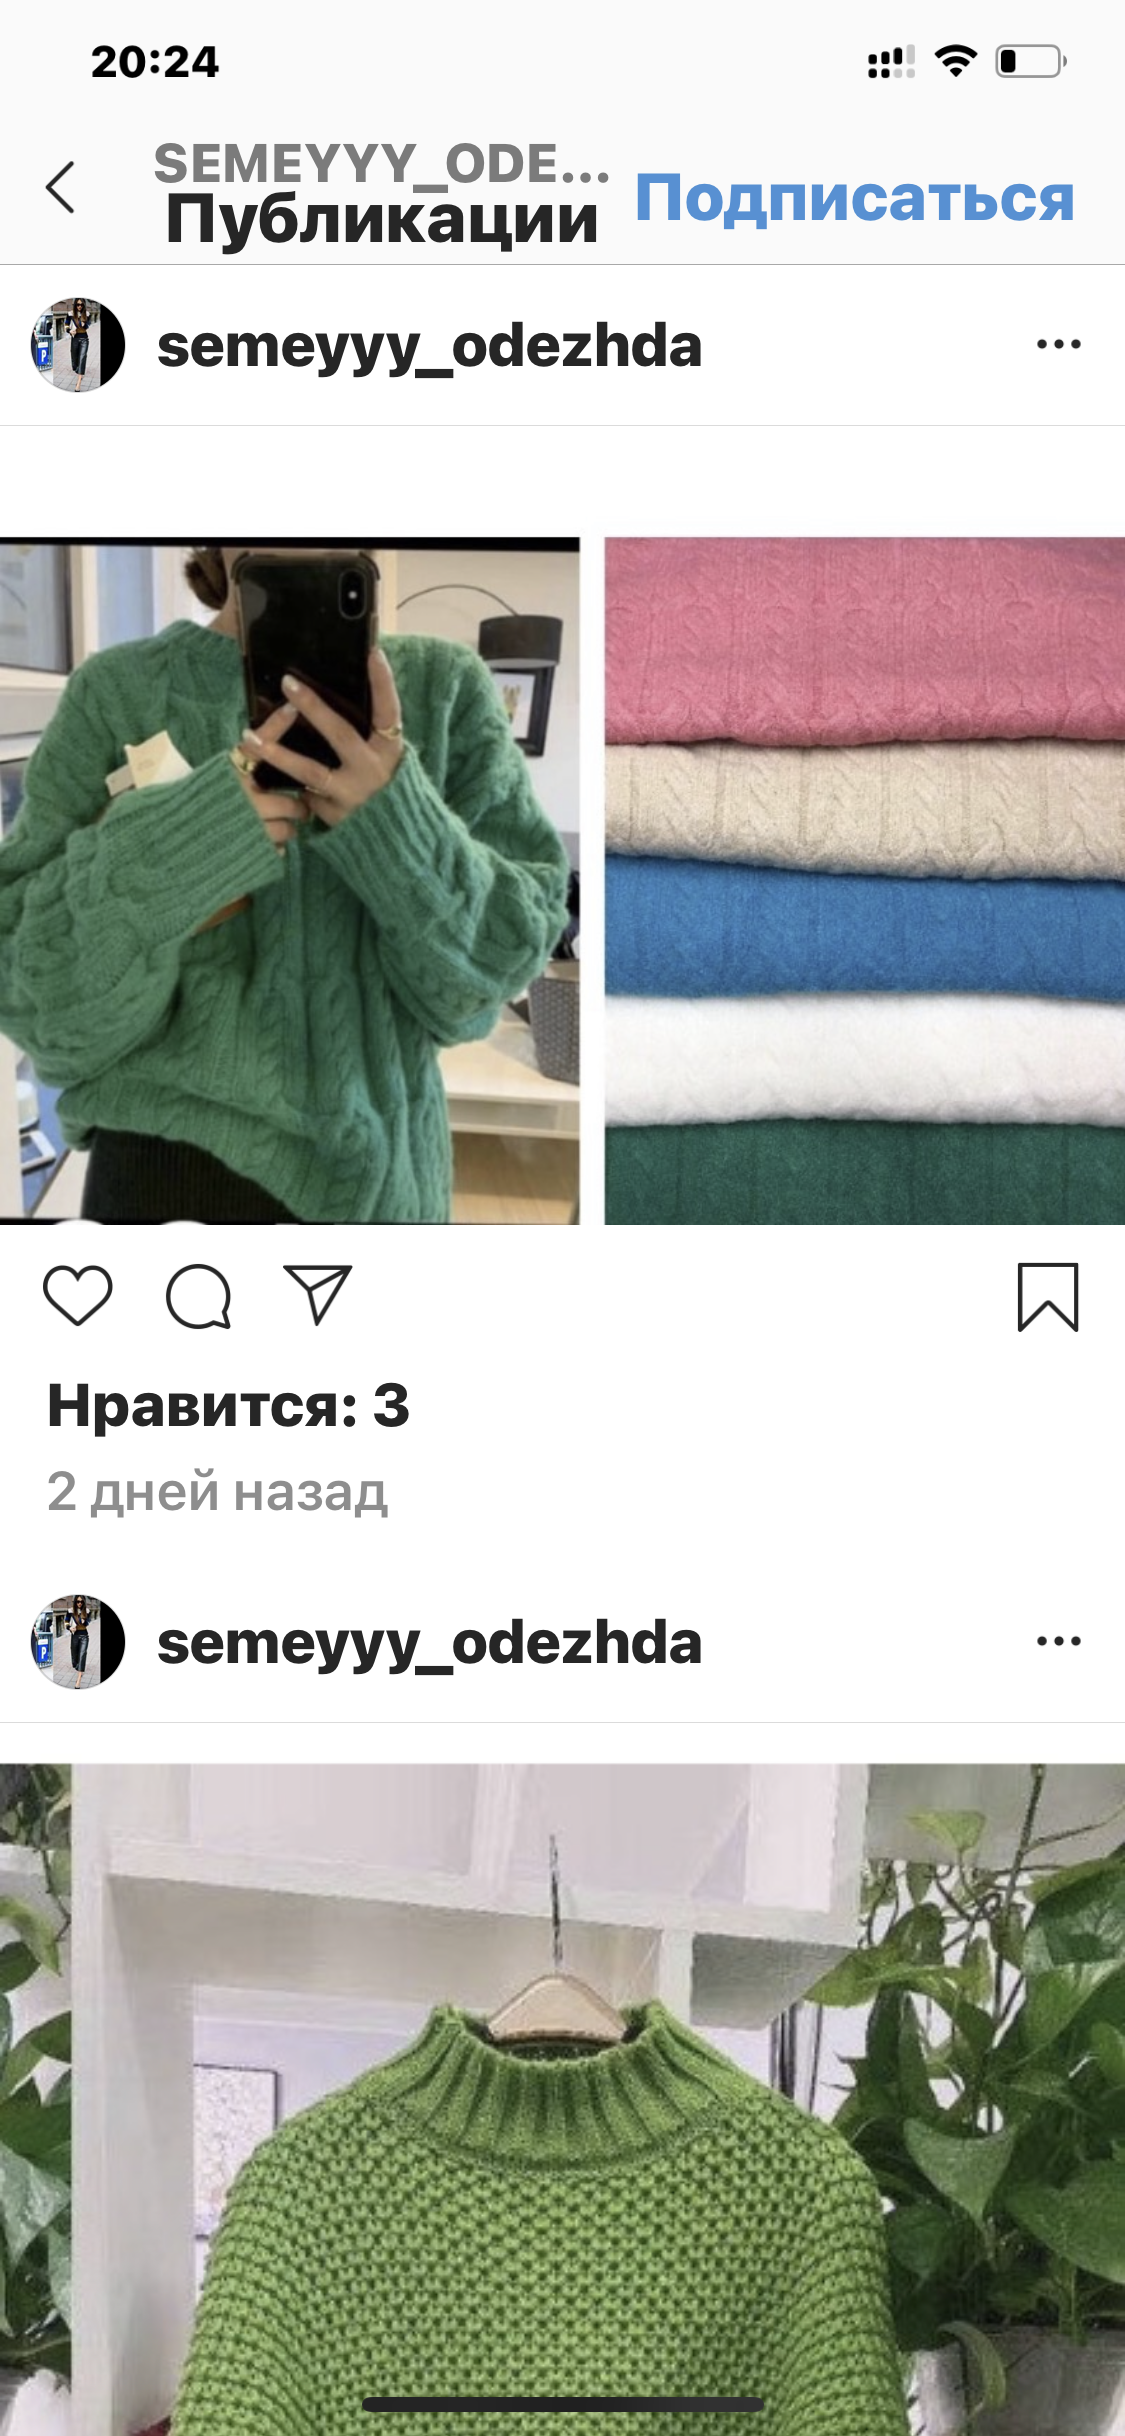 <p>Women&#39;s clothing and footwear in bed or calm colors, kezhl style, sizes according to European standards. Fashionable casual wear for youth. The volume for the beginning is calculated in the region of $ 2500 to buy, and as needed.</p>

<p>&nbsp;</p>

<p>(translated from russian)</p>